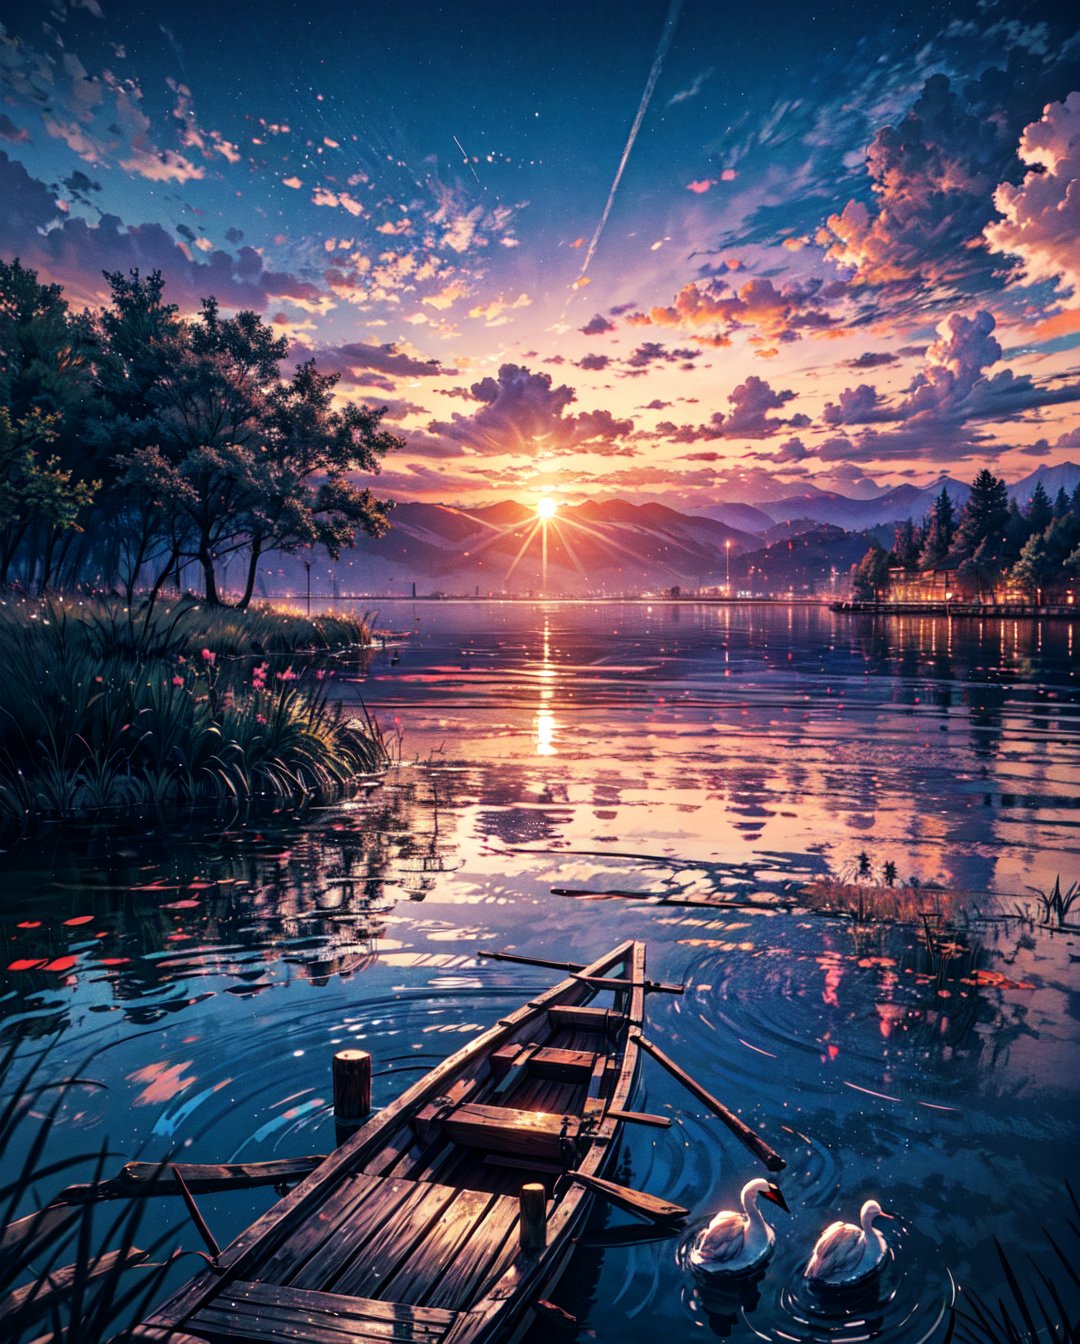 panoramic view, panoramic photograph, panoramic shot, Create an image of a serene lakeside scene at sunset. The calm waters of the lake mirror the brilliant oranges, pinks, and purples of the sky as the sun dips below the horizon. Tall, slender reeds sway gently at the water's edge, and a wooden dock extends out into the lake, with an old rowboat tied to it. On the far side of the lake, dense forest surrounds the water, its silhouette dark against the colorful sky. A pair of swans glides gracefully across the water, leaving ripples in their wake. The atmosphere is peaceful and still, capturing the quiet beauty of nature at the end of the day.